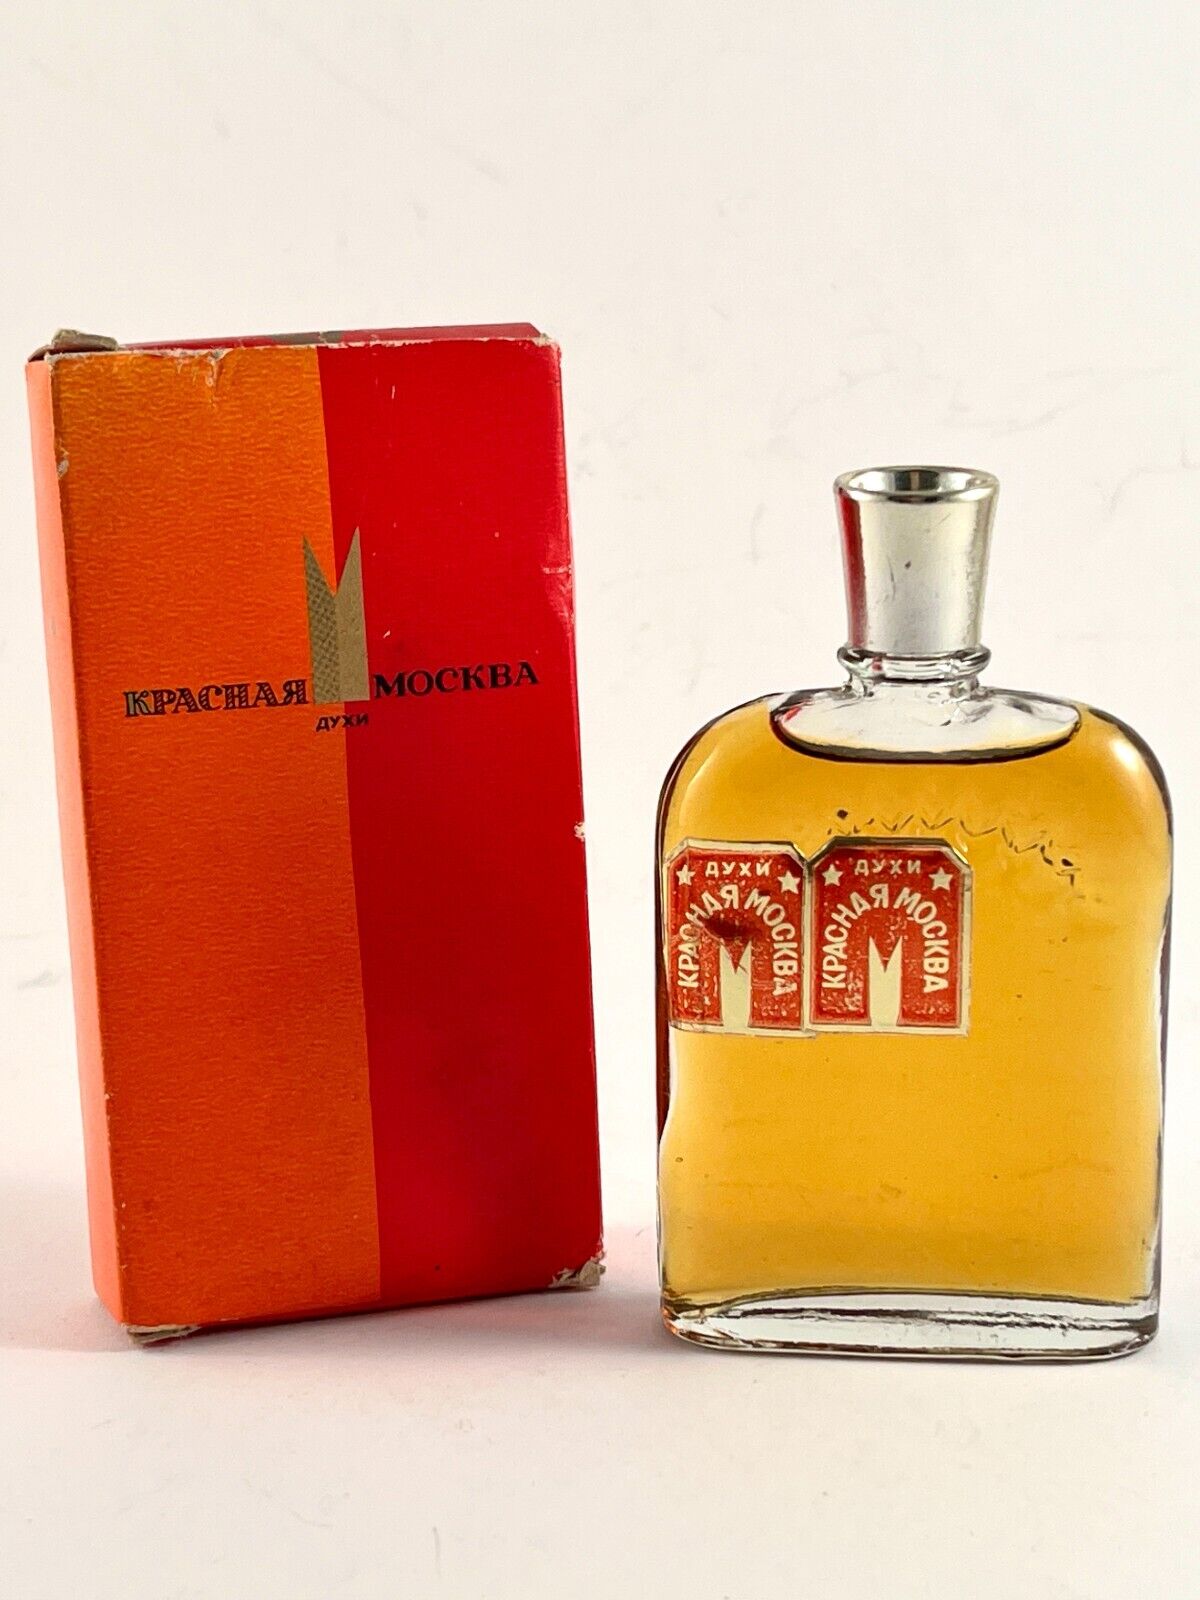 Original 1970’s Soviet Cult Classic Vintage Perfume “Red Moscow” Made In USSR